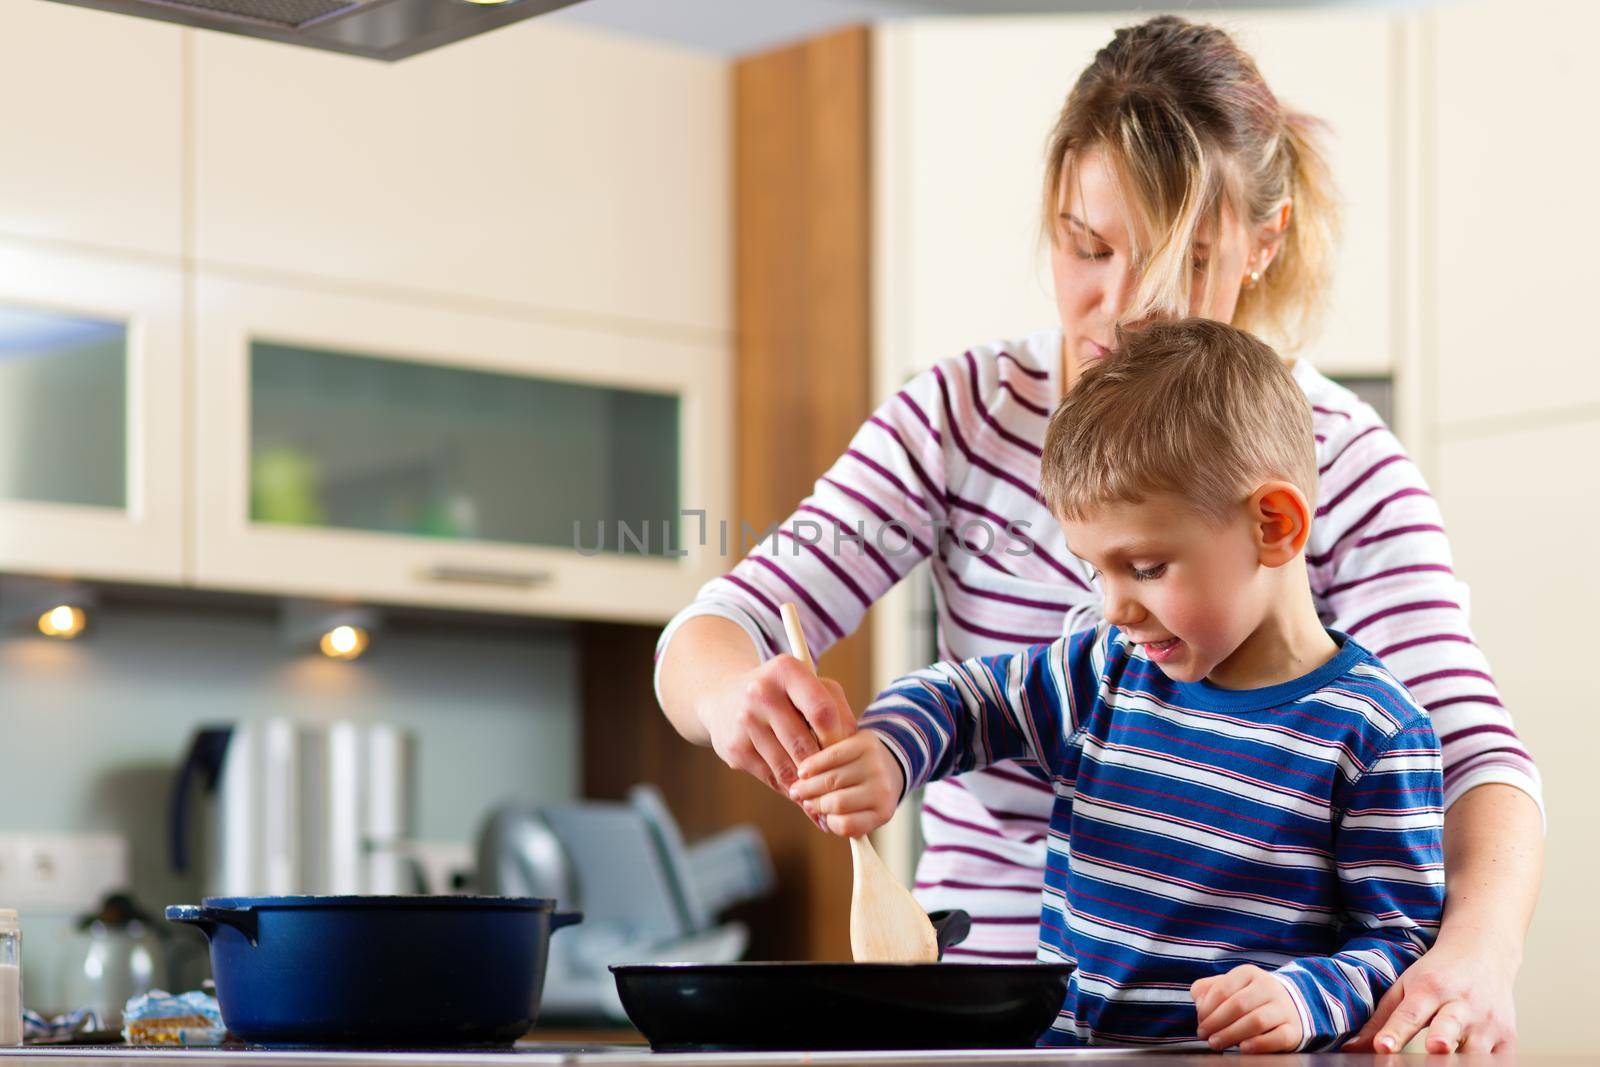 Family cooking in kitchen by Kzenon